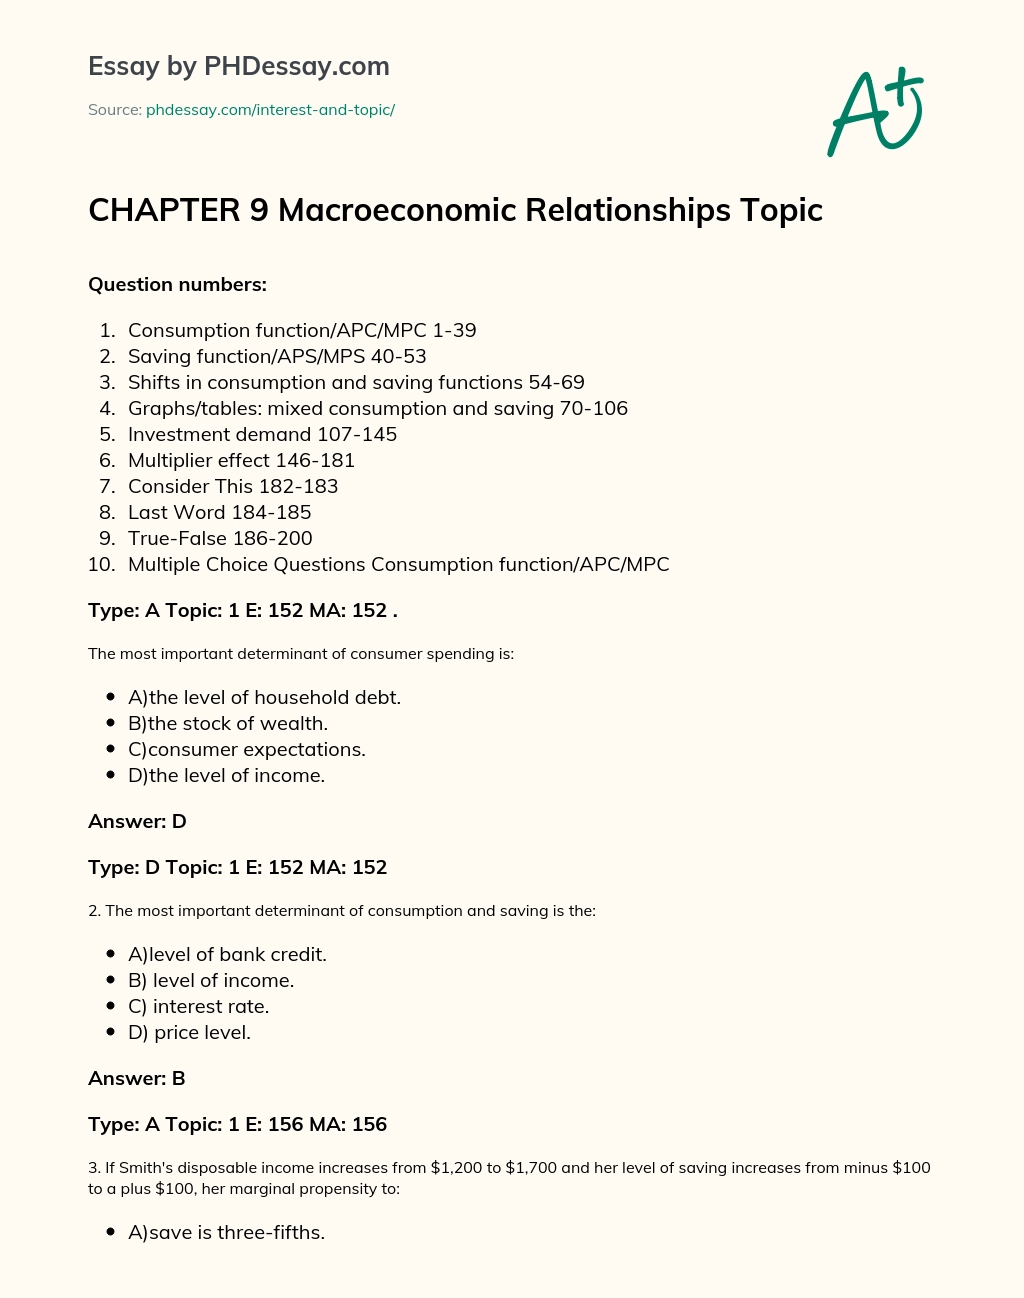 CHAPTER 9 Macroeconomic Relationships Topic essay